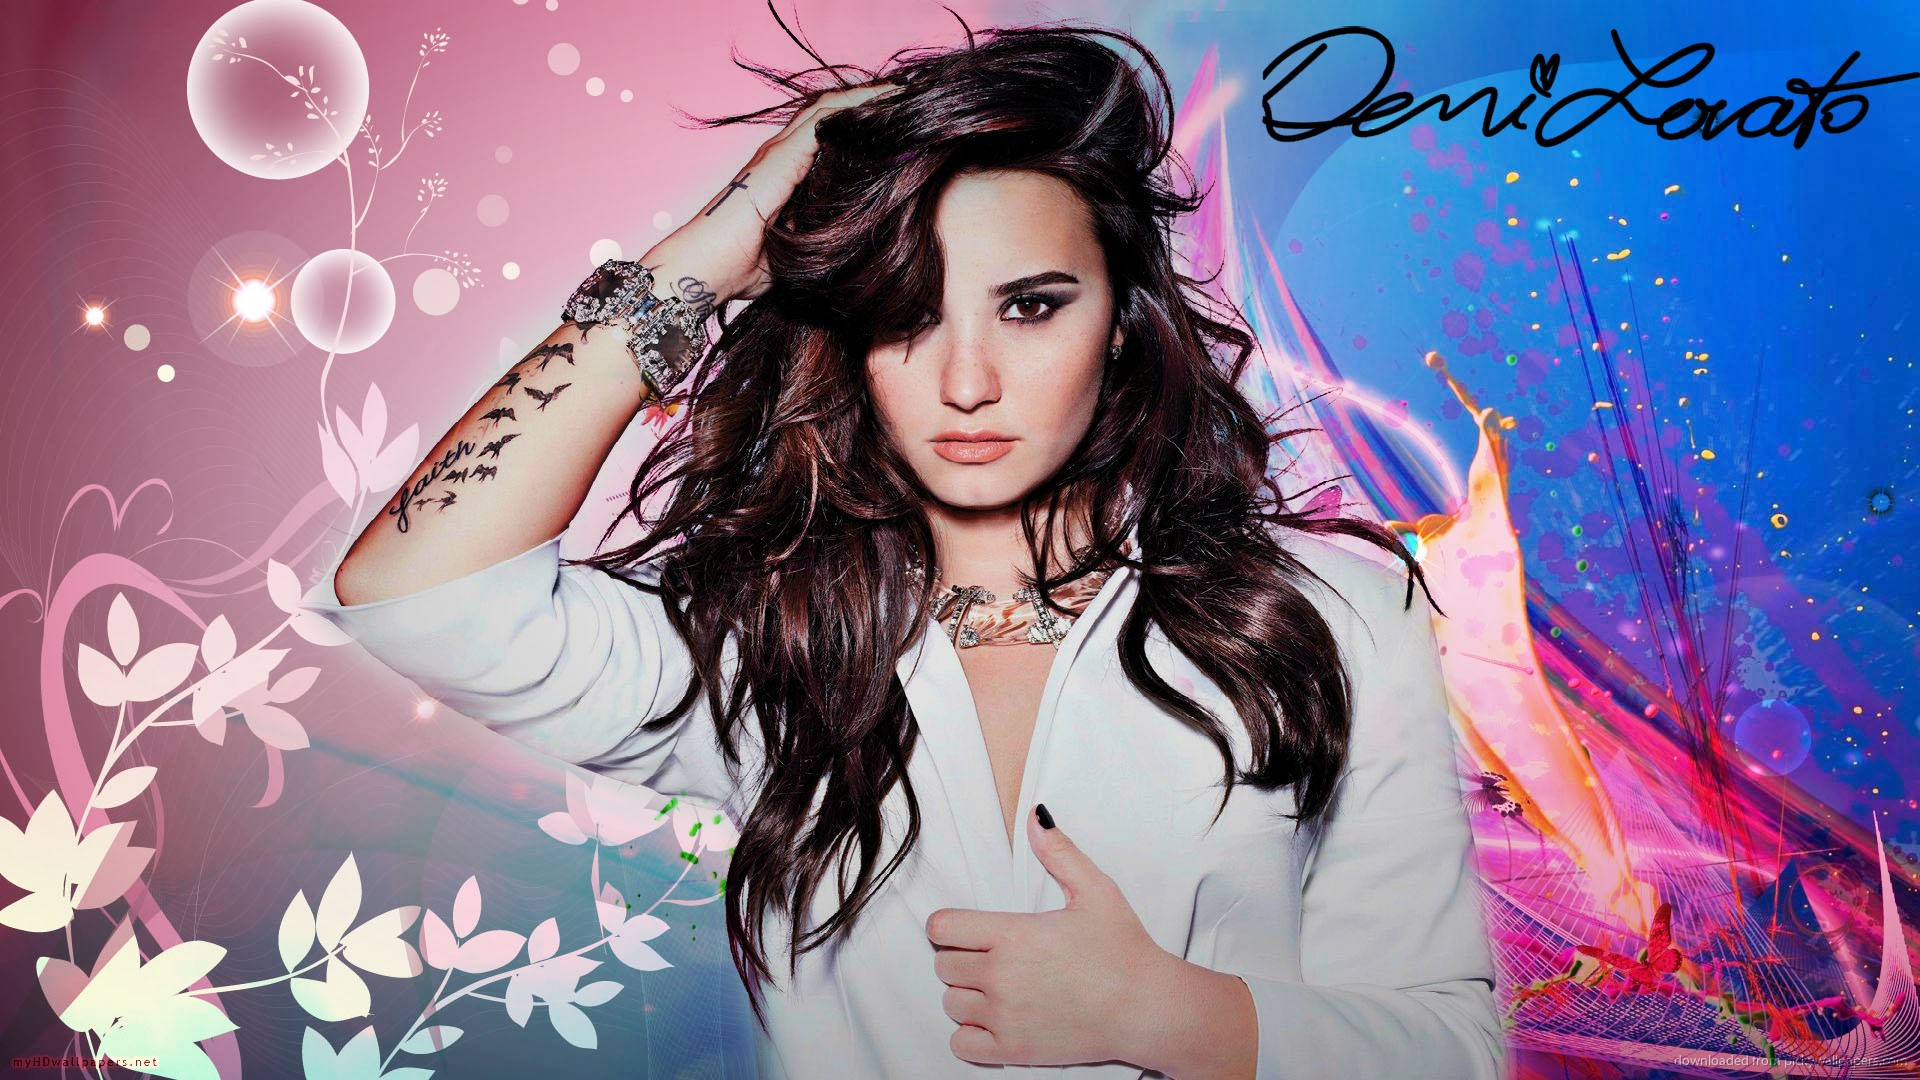 demi lovato musicians Wallpapers HD / Desktop and Mobile Backgrounds.